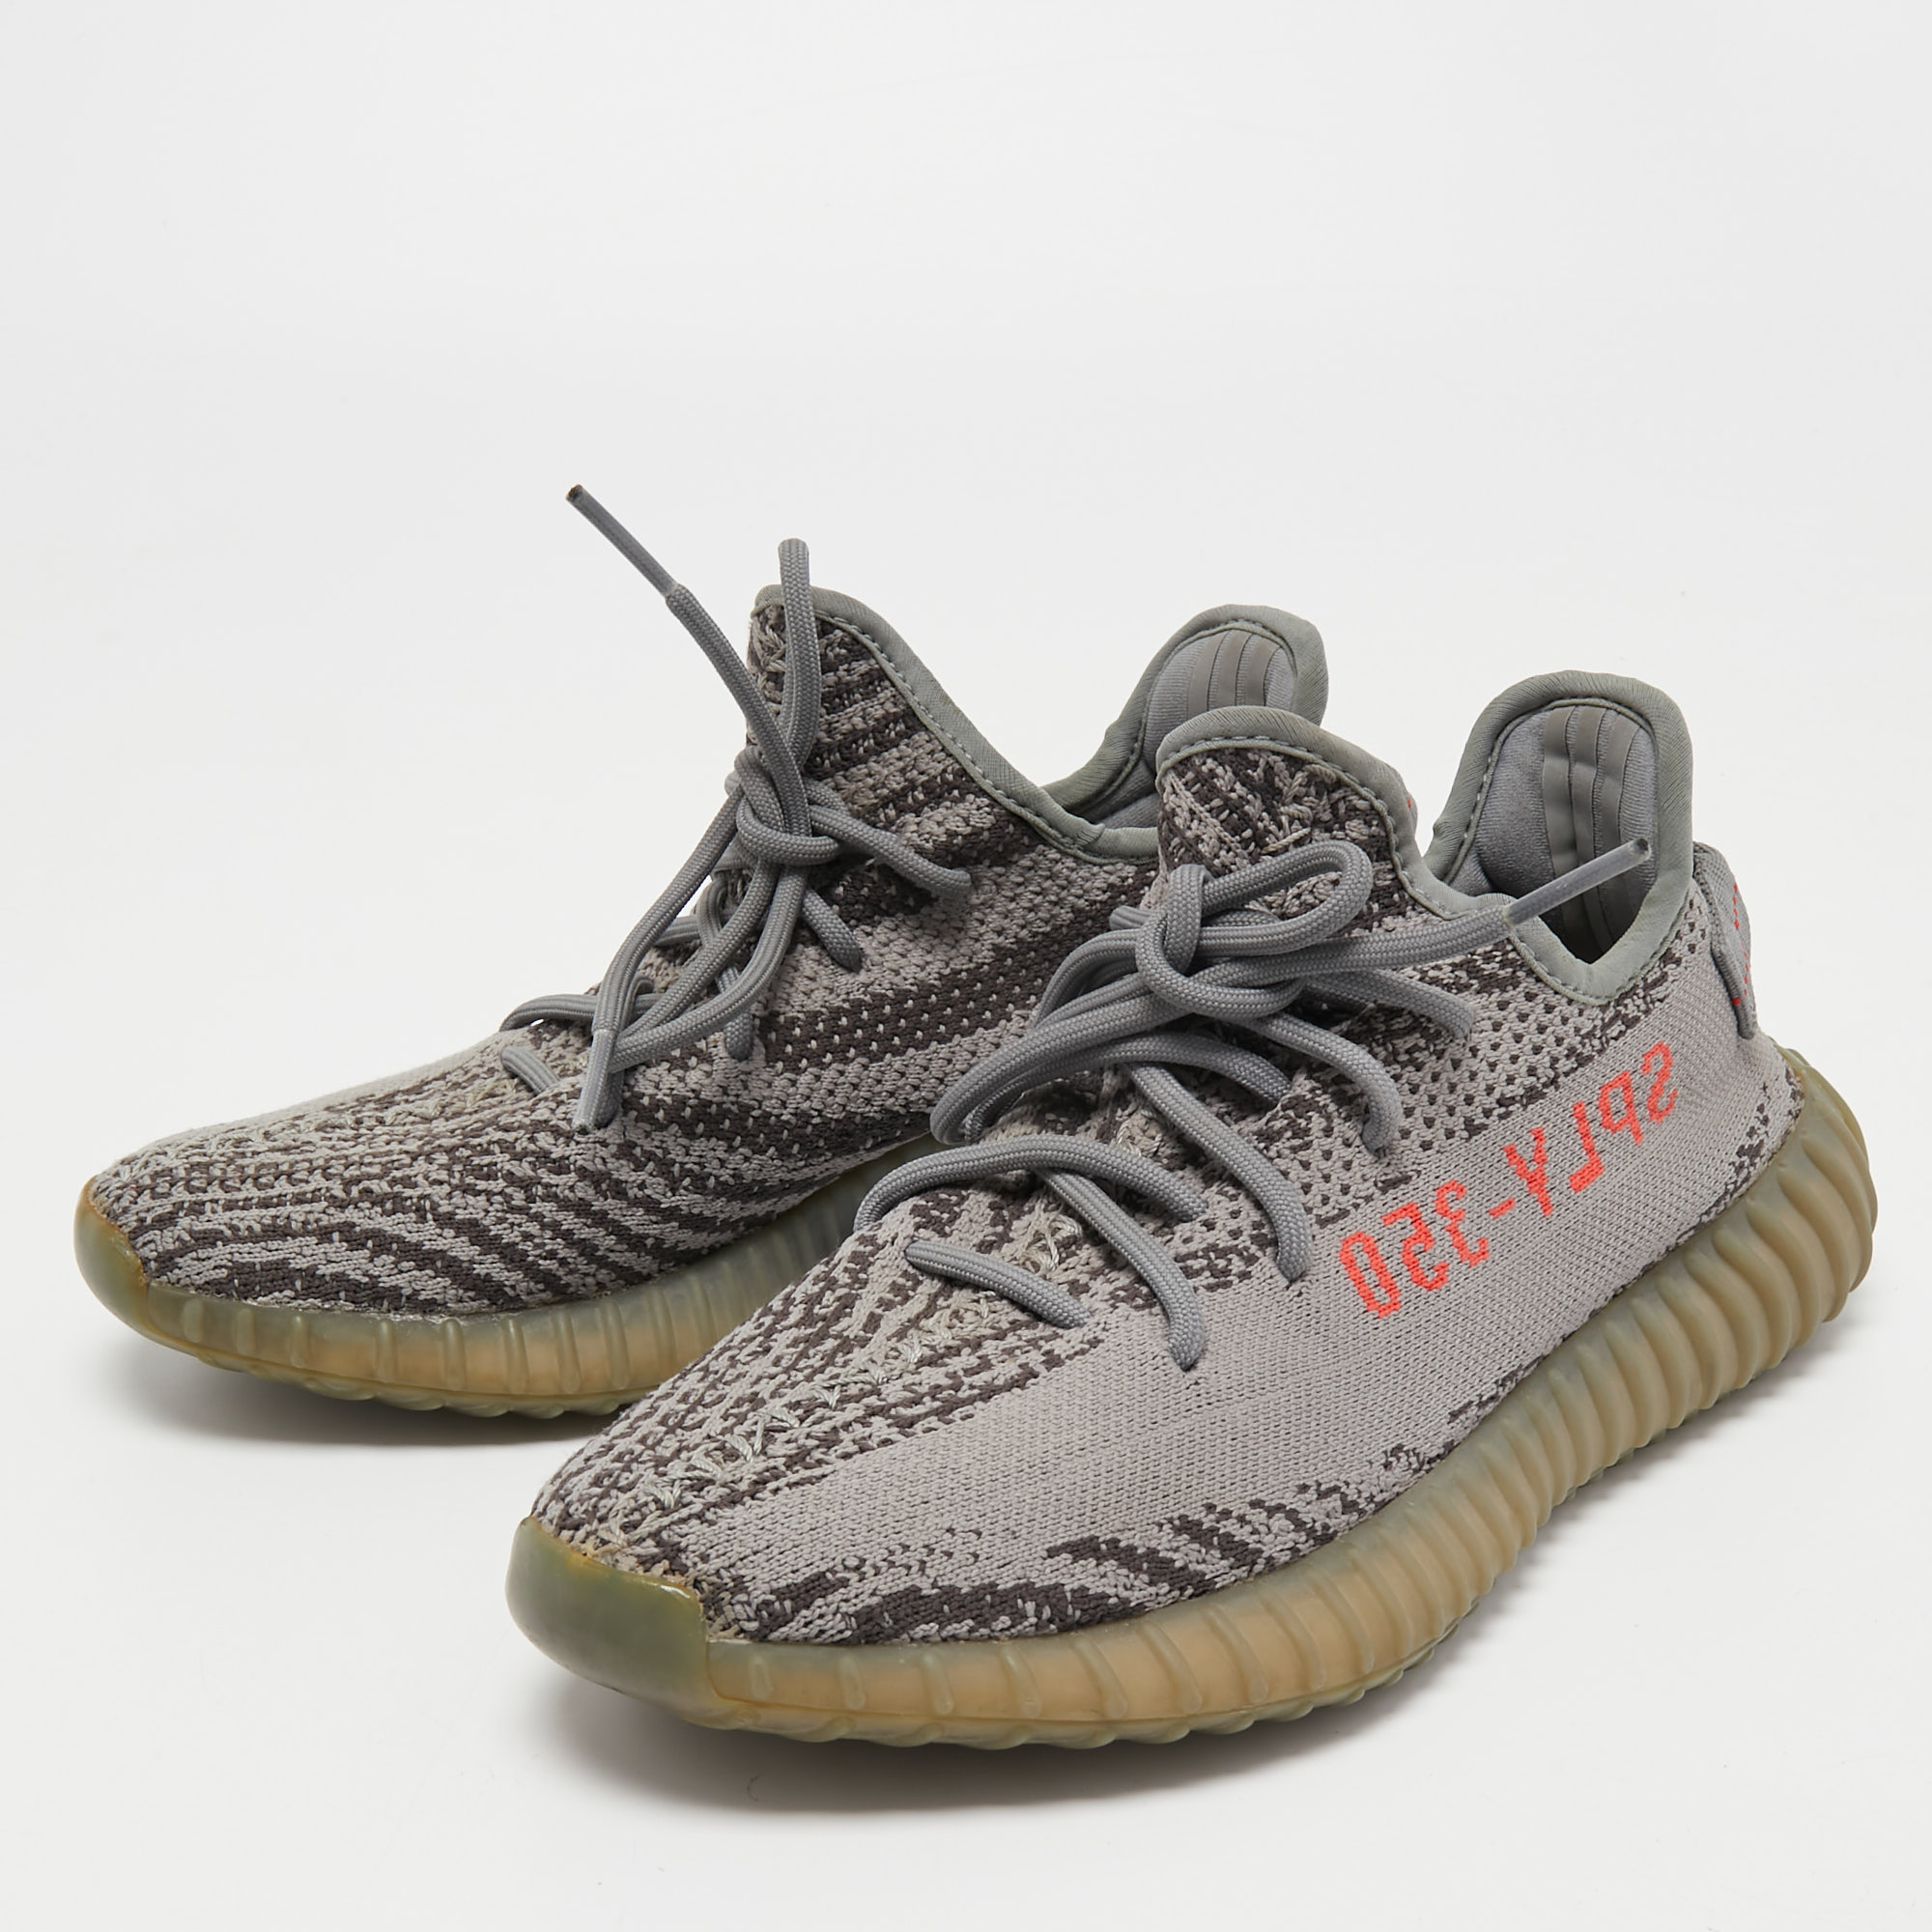 

Yeezy x Adidas Grey Knit Fabric Boost 350 V2 Beluga Sneakers Size 40 2/3